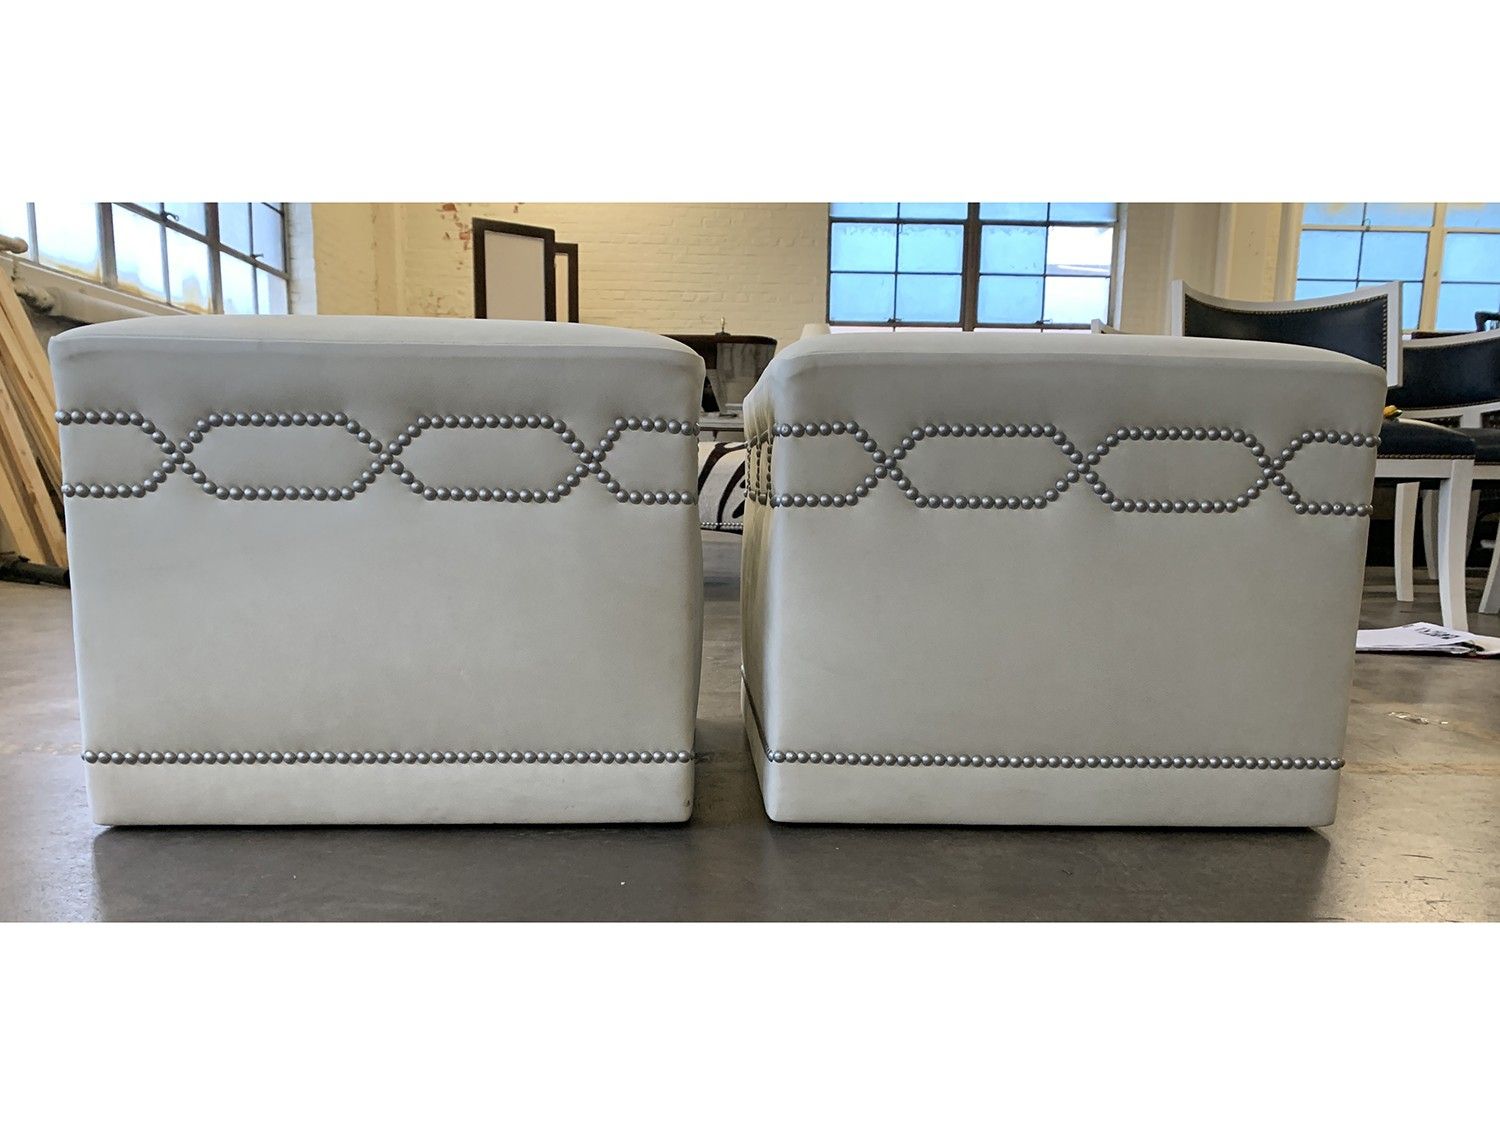 Light Grey Soft Leather Cube Ottoman With Nailhead, Pair • The Local Vault Intended For Light Blue And Gray Solid Cube Pouf Ottomans (View 2 of 20)